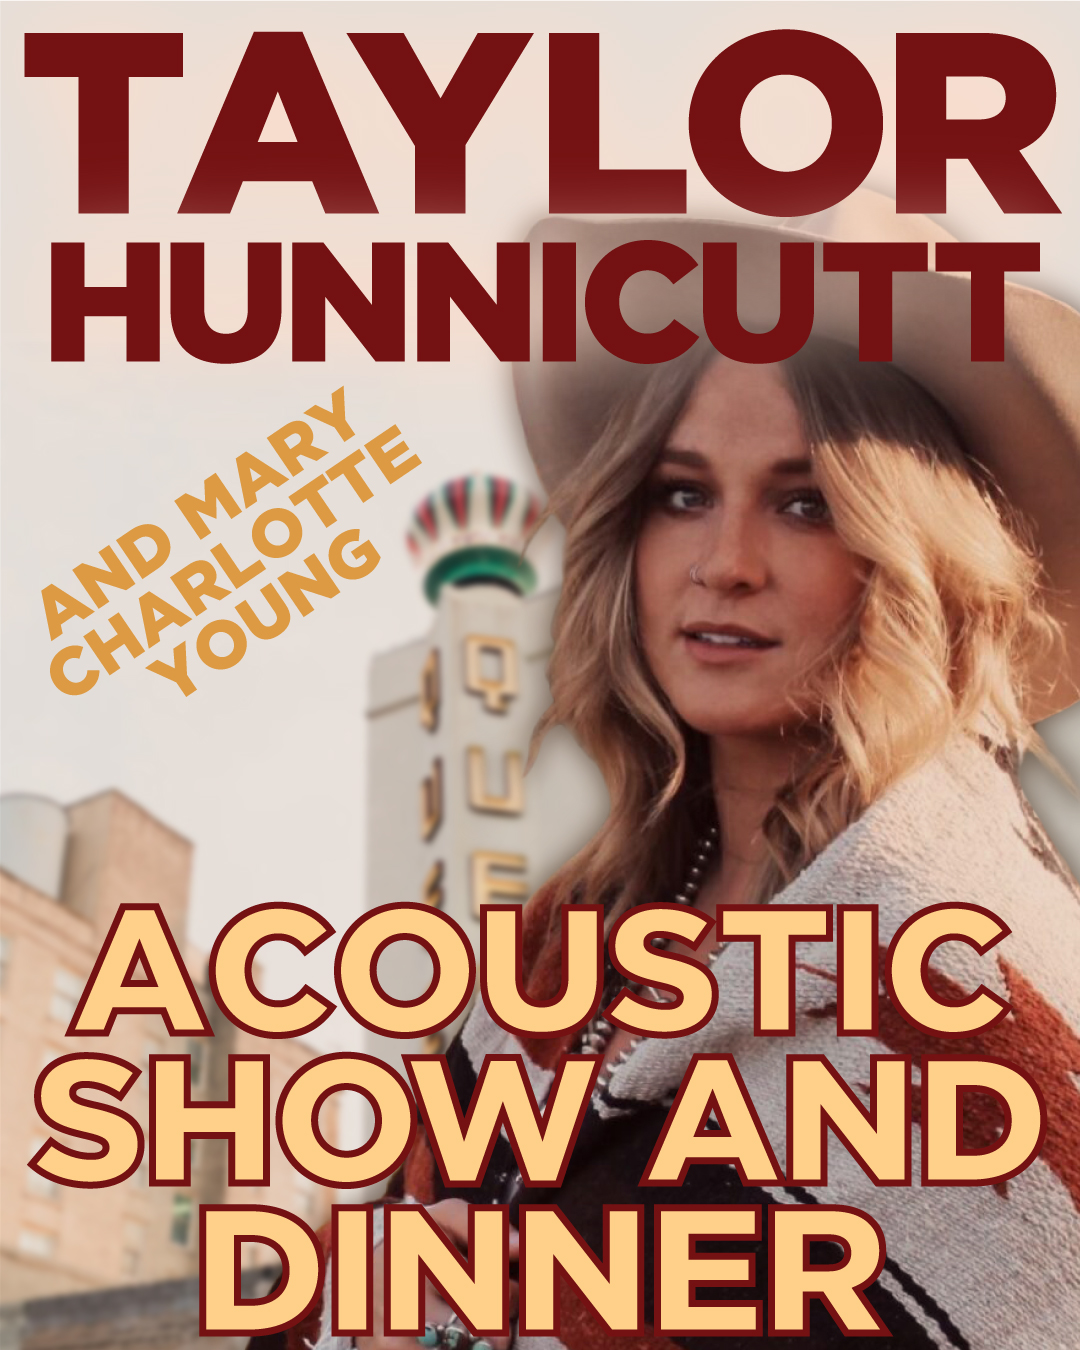 Taylor Hunnicutt Acoustic Show and Dinner